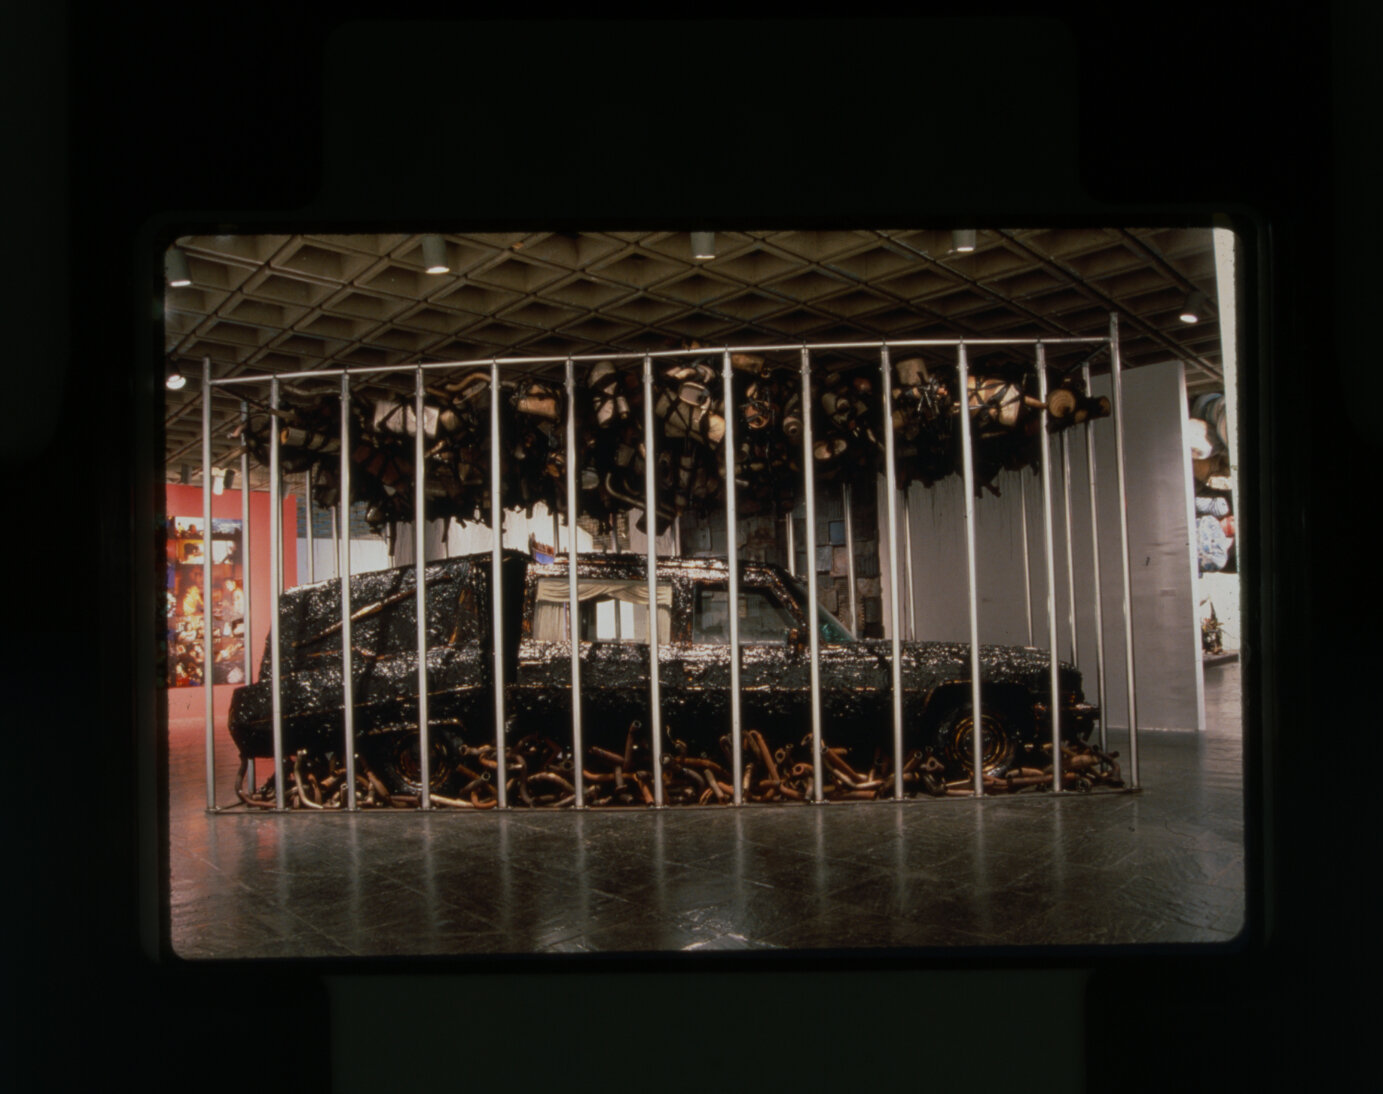  Nari Ward  Peace Keeper , 1995 Hearse, grease, mufflers, and feathers   144 x 116 x 264 in (365.8 x 294.6 x 670.6 cm) Installation views: Whitney Museum of American Art, New York, 1995. Courtesy the artist, Lehmann Maupin, New York, Hong Kong, and S